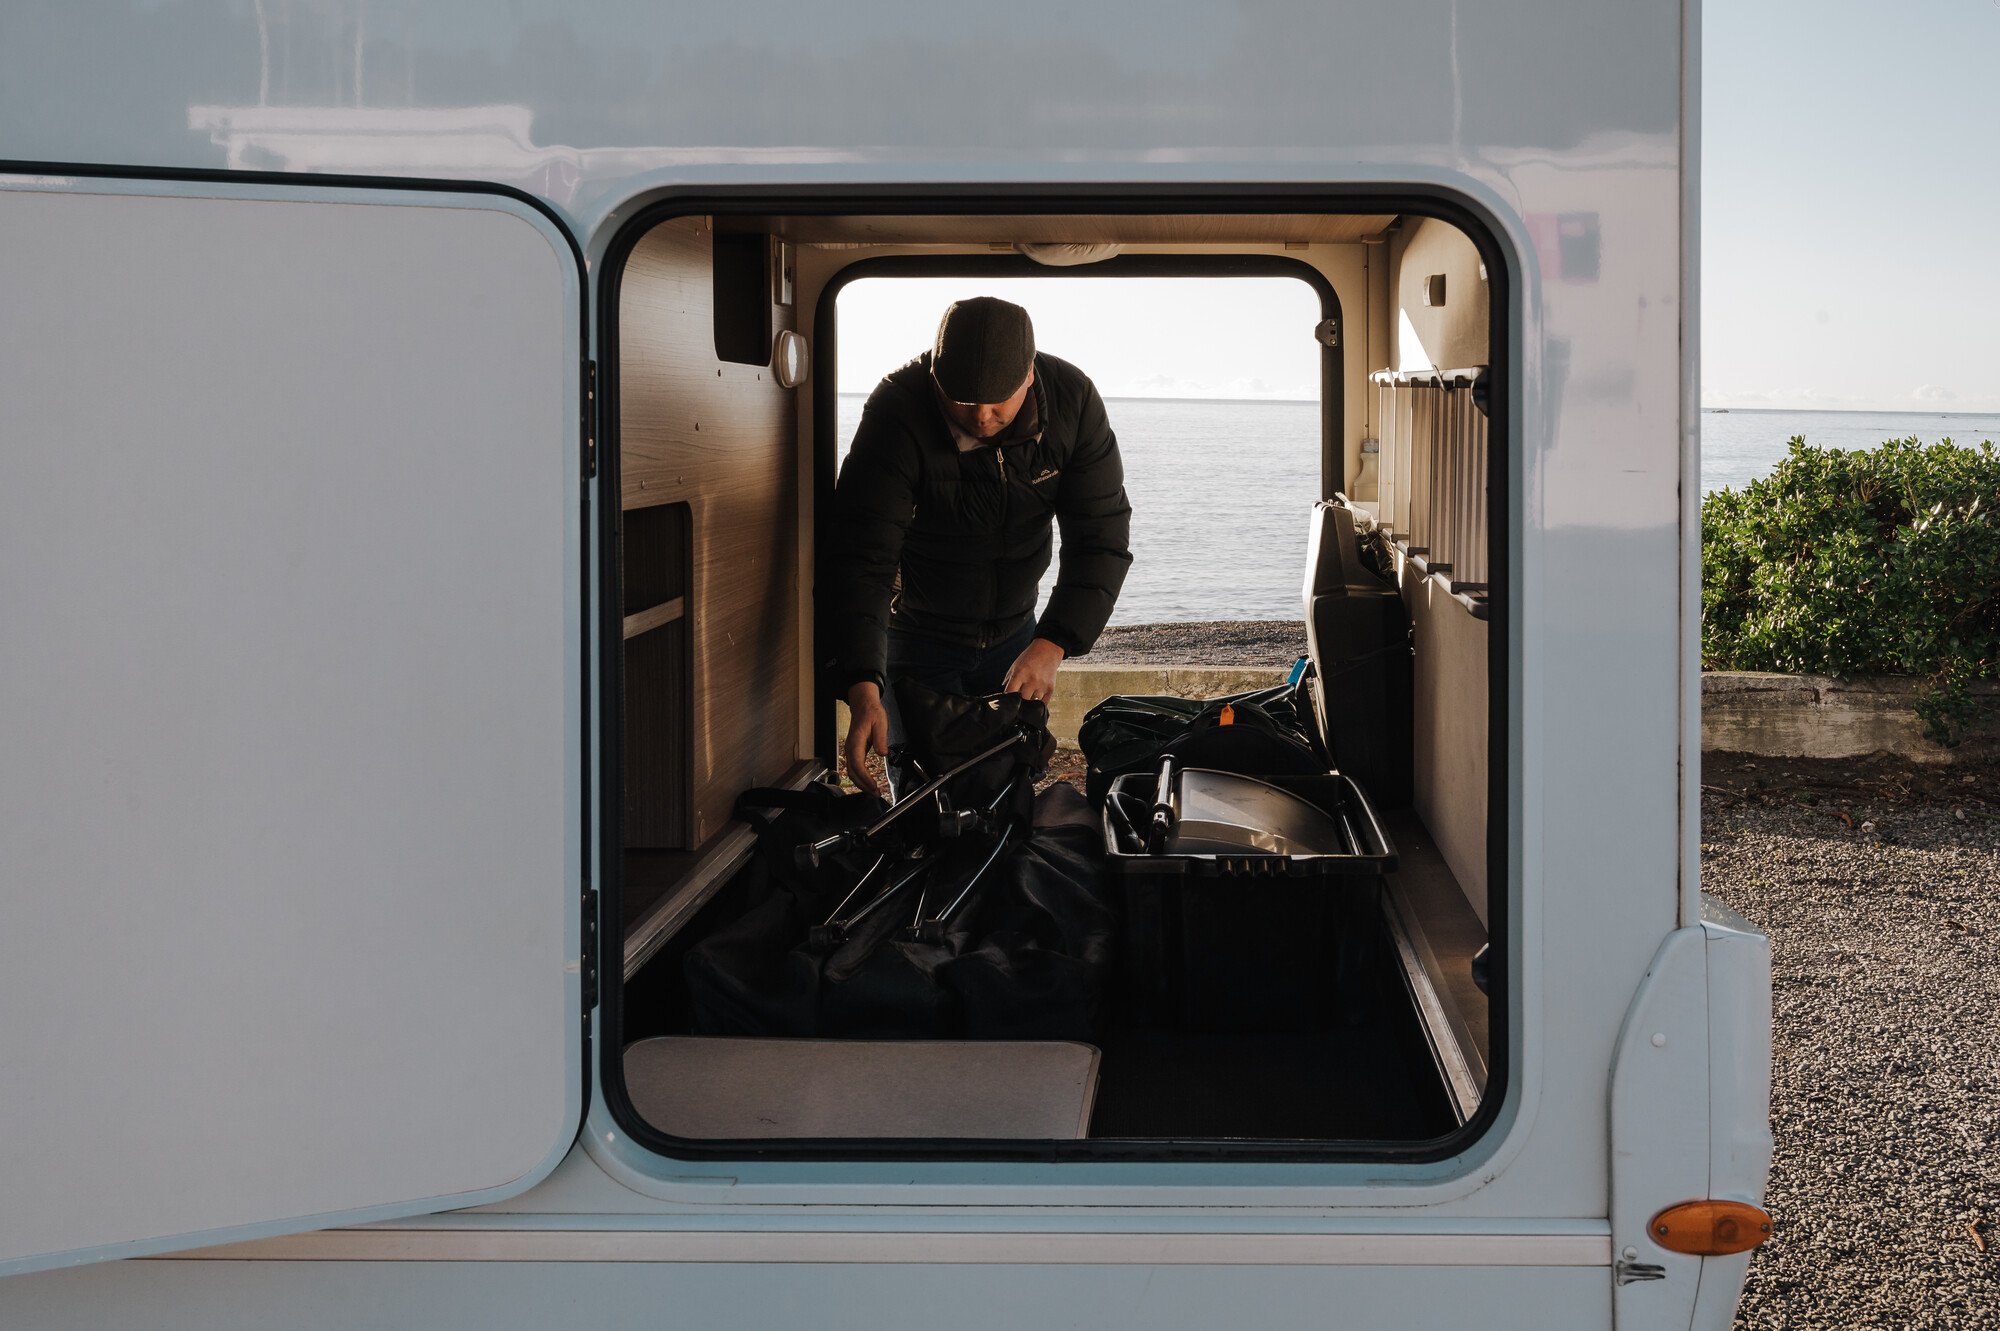 Store away your valuables out of sight in the motorhome garage